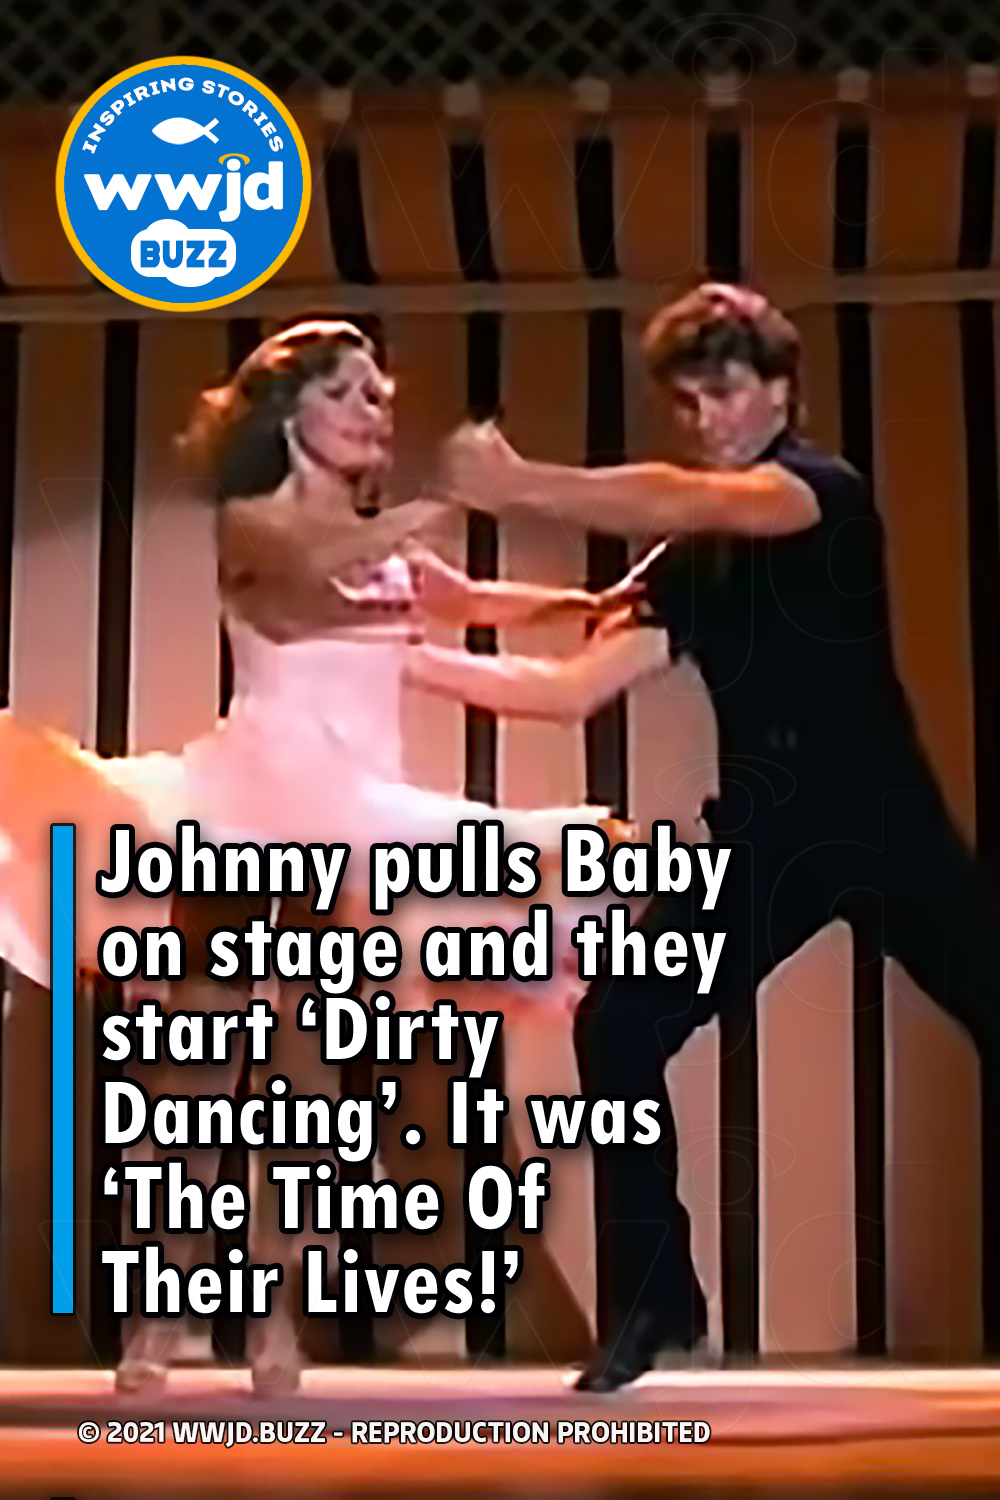 Johnny pulls Baby on stage and they start ‘Dirty Dancing’. It was ‘The Time Of Their Lives!’